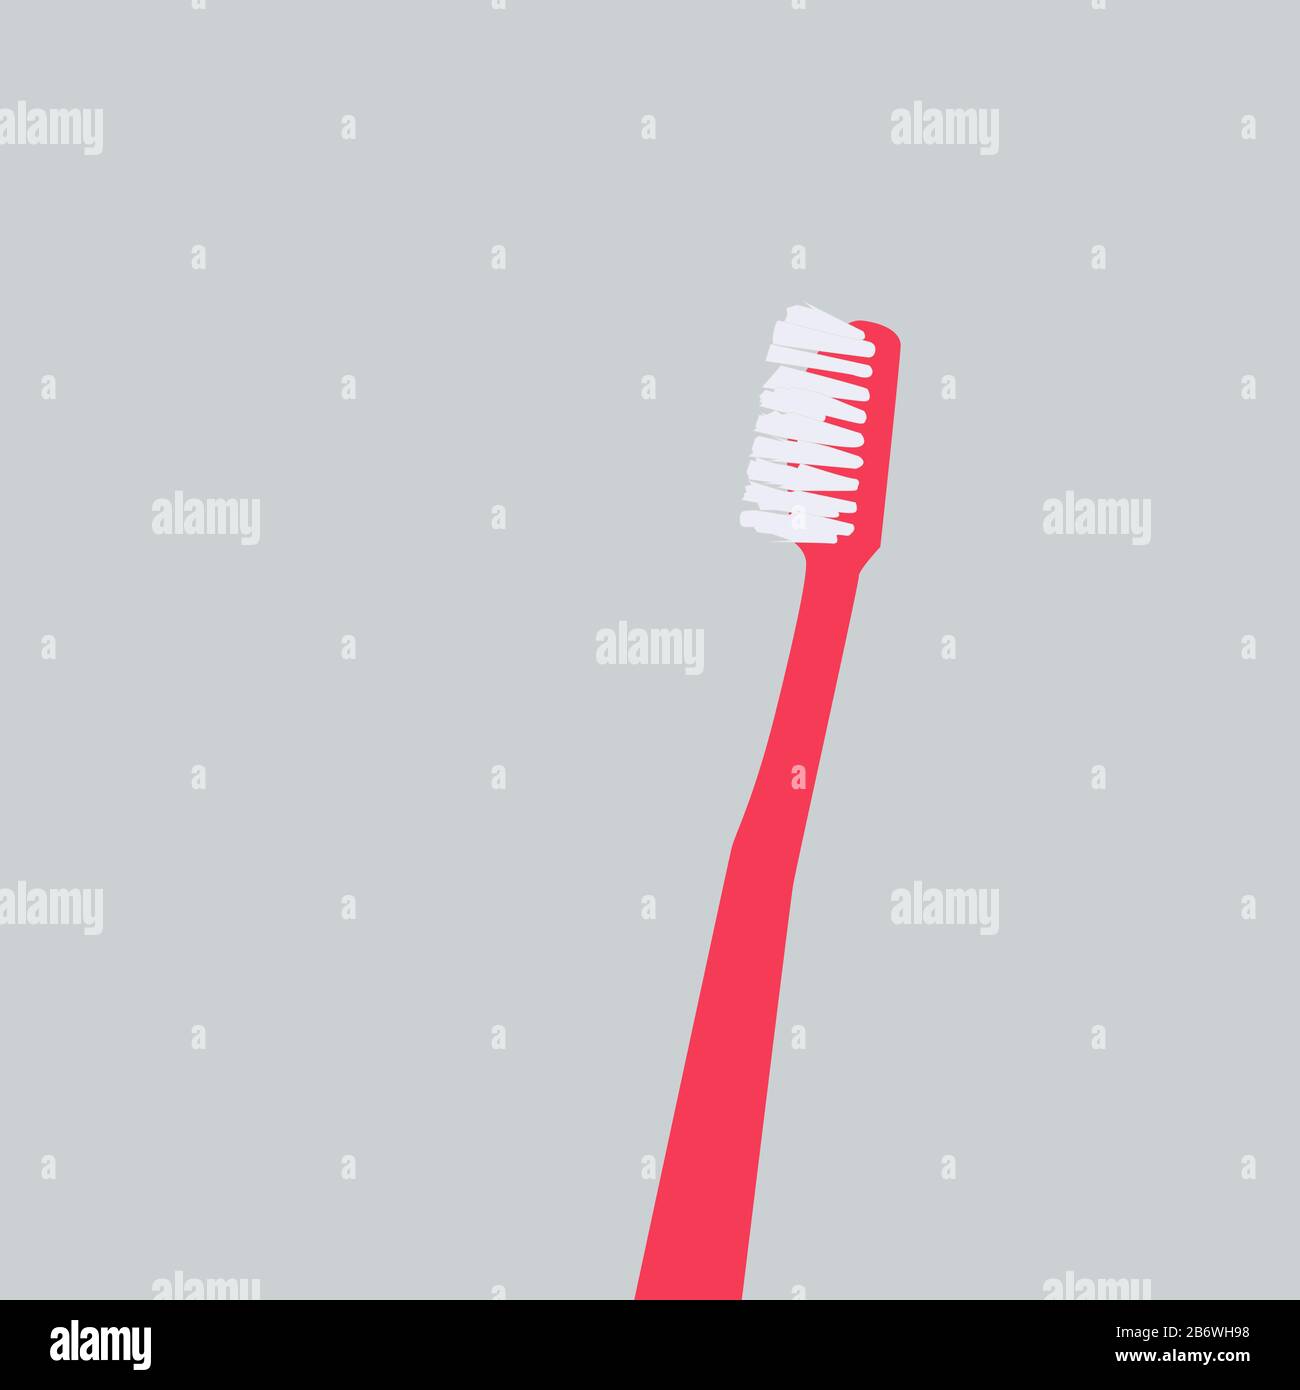 Red toothbrush, illustration, vector on white background. Stock Vector